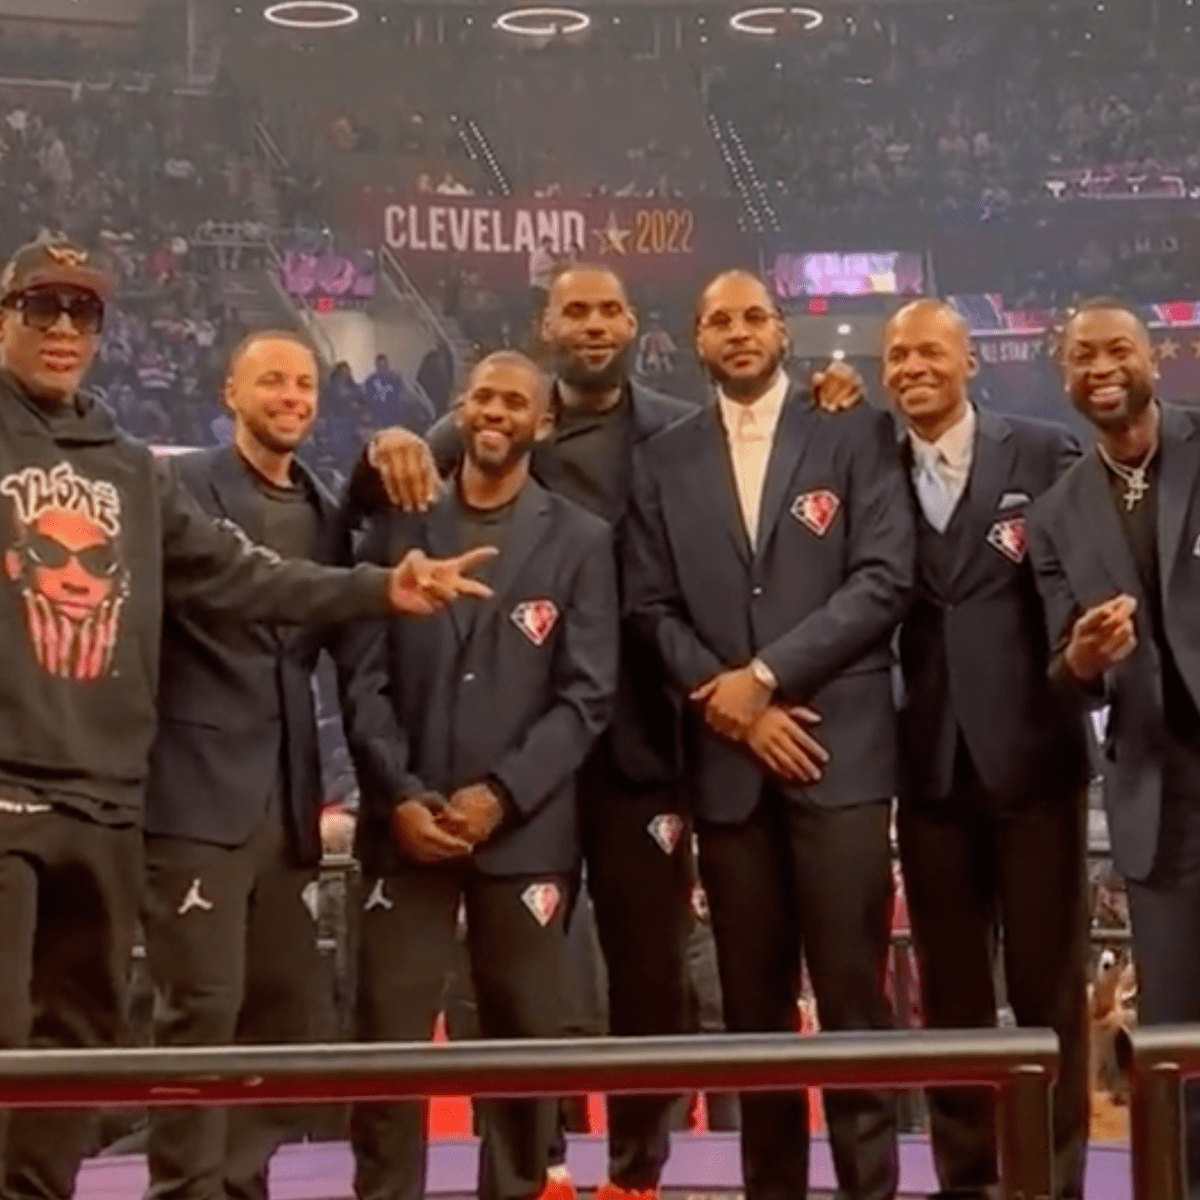 The FULL NBA 75 Team Ceremony at NBA All-Star 